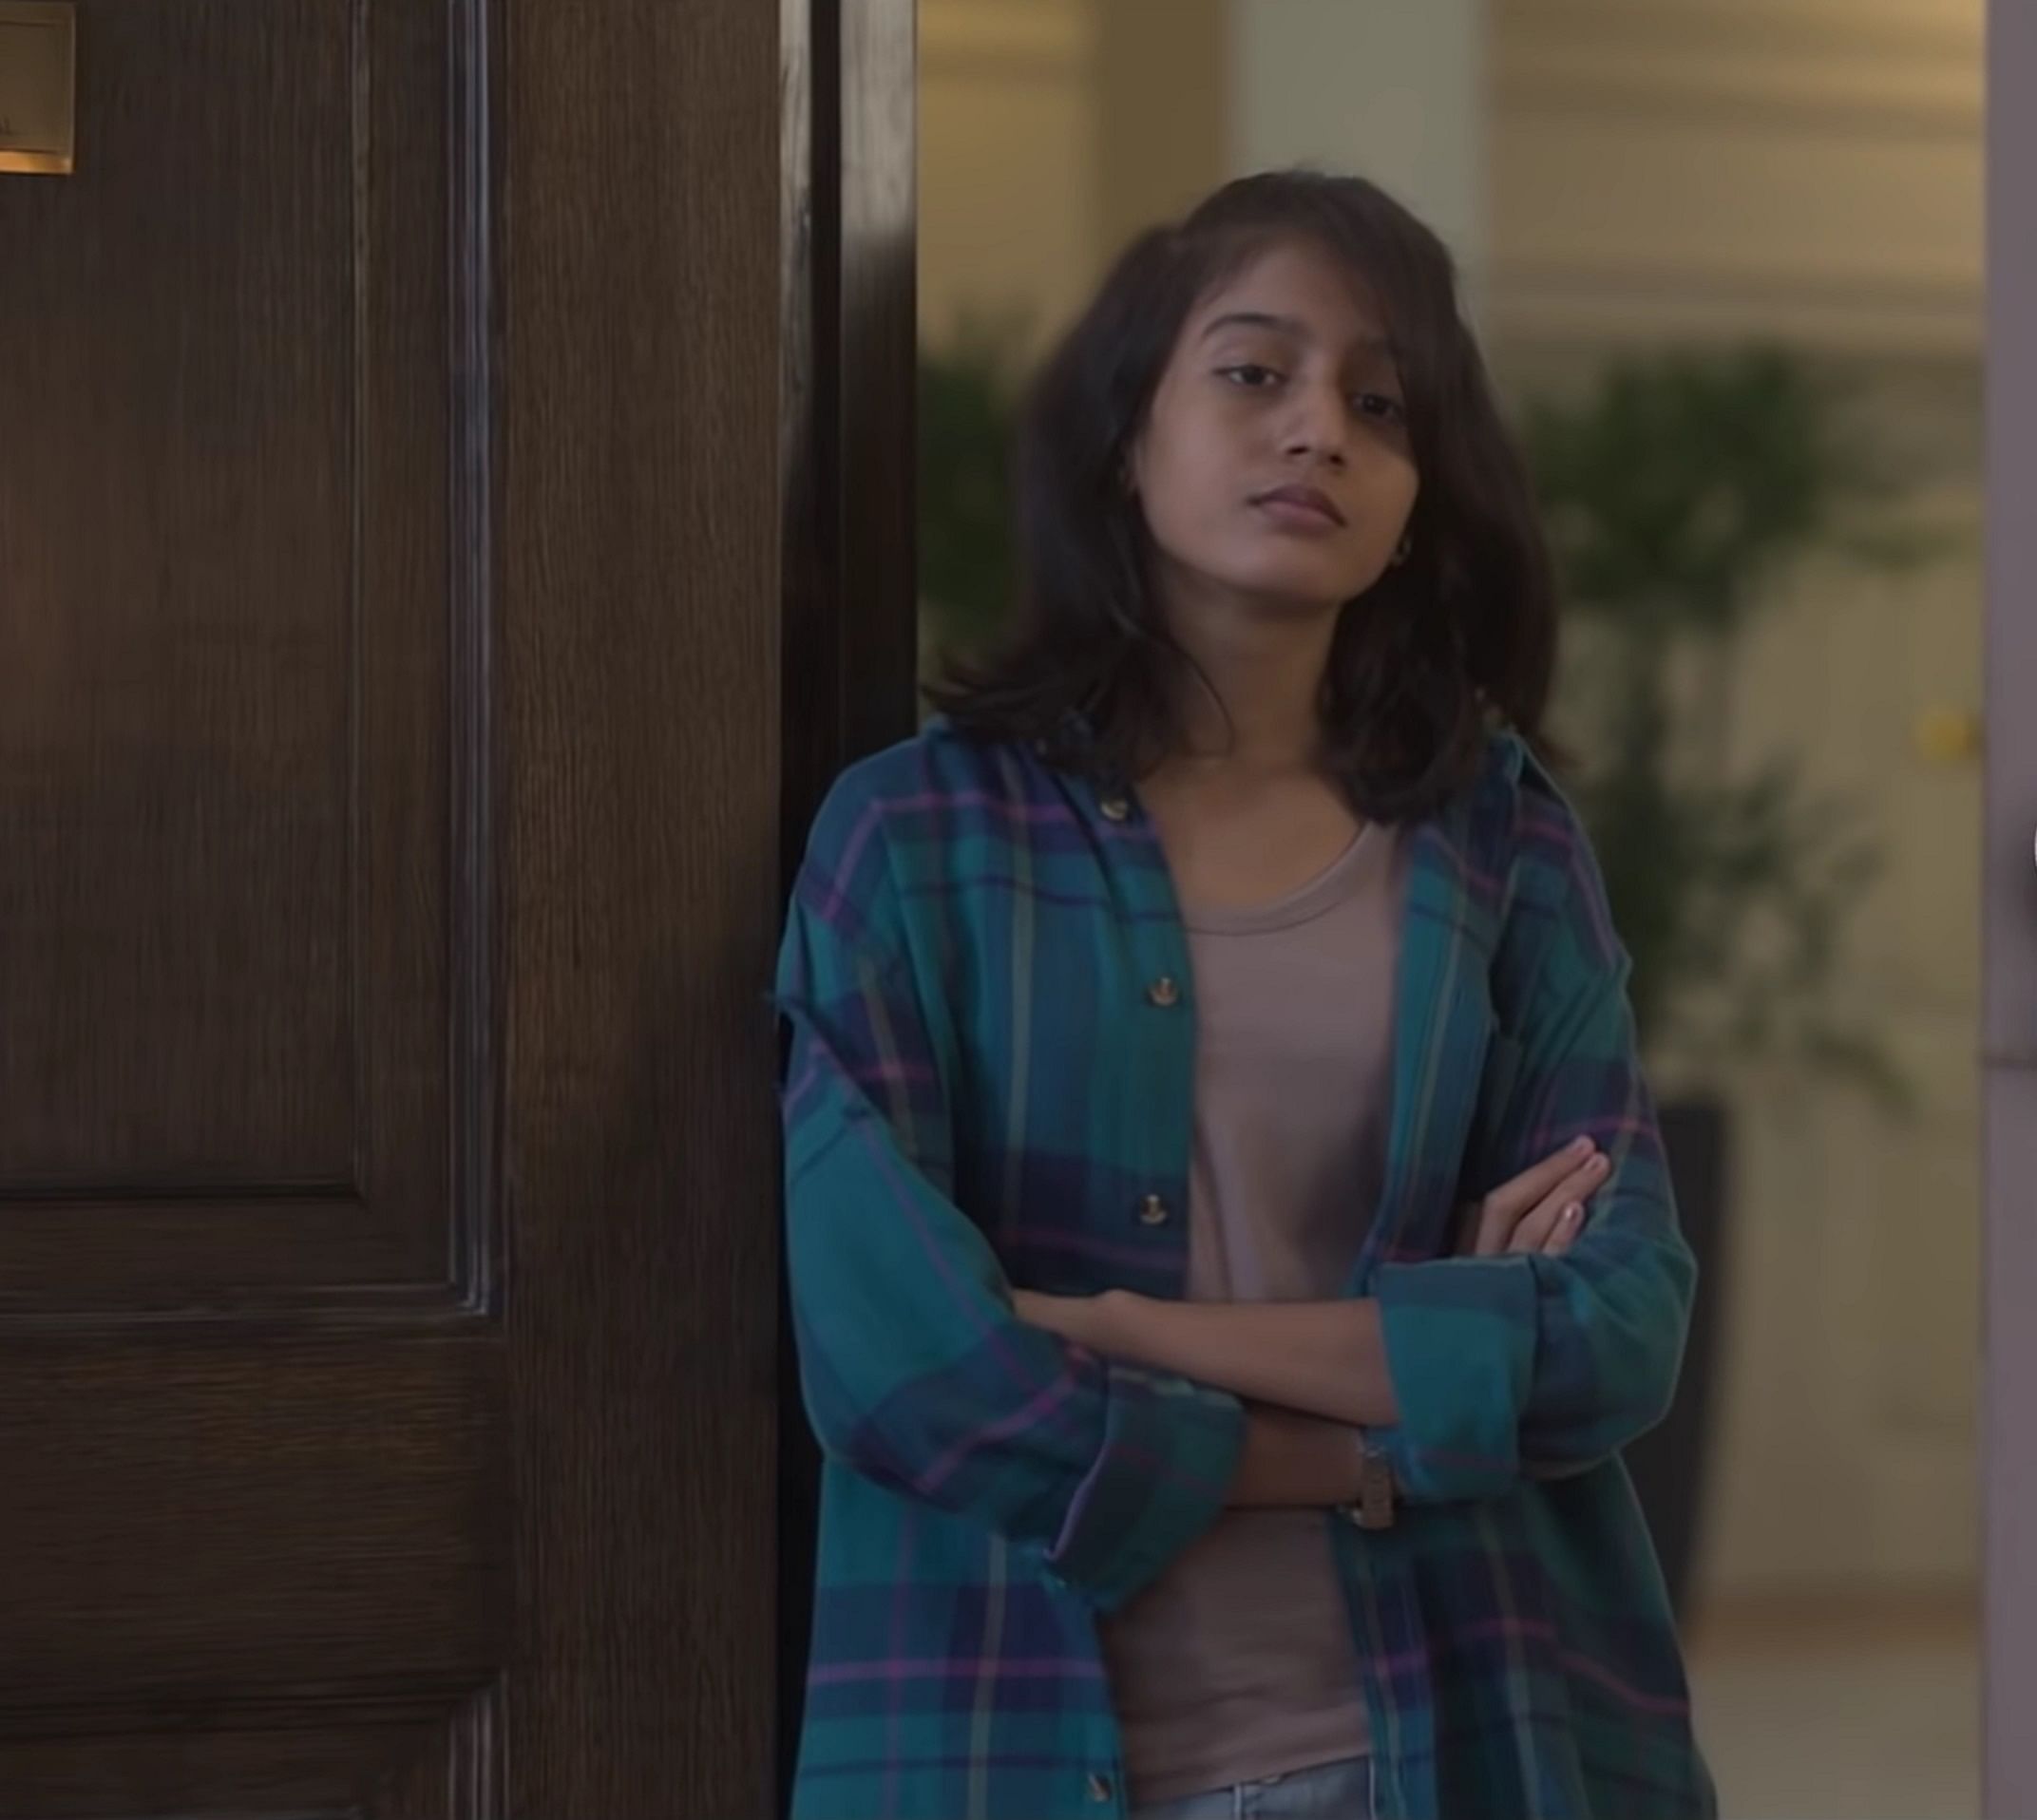 In 'Bombay Begums', Aadhya Anand plays Shai, a 13-year-old who is in a tumultuous relationship with her step-mother.   